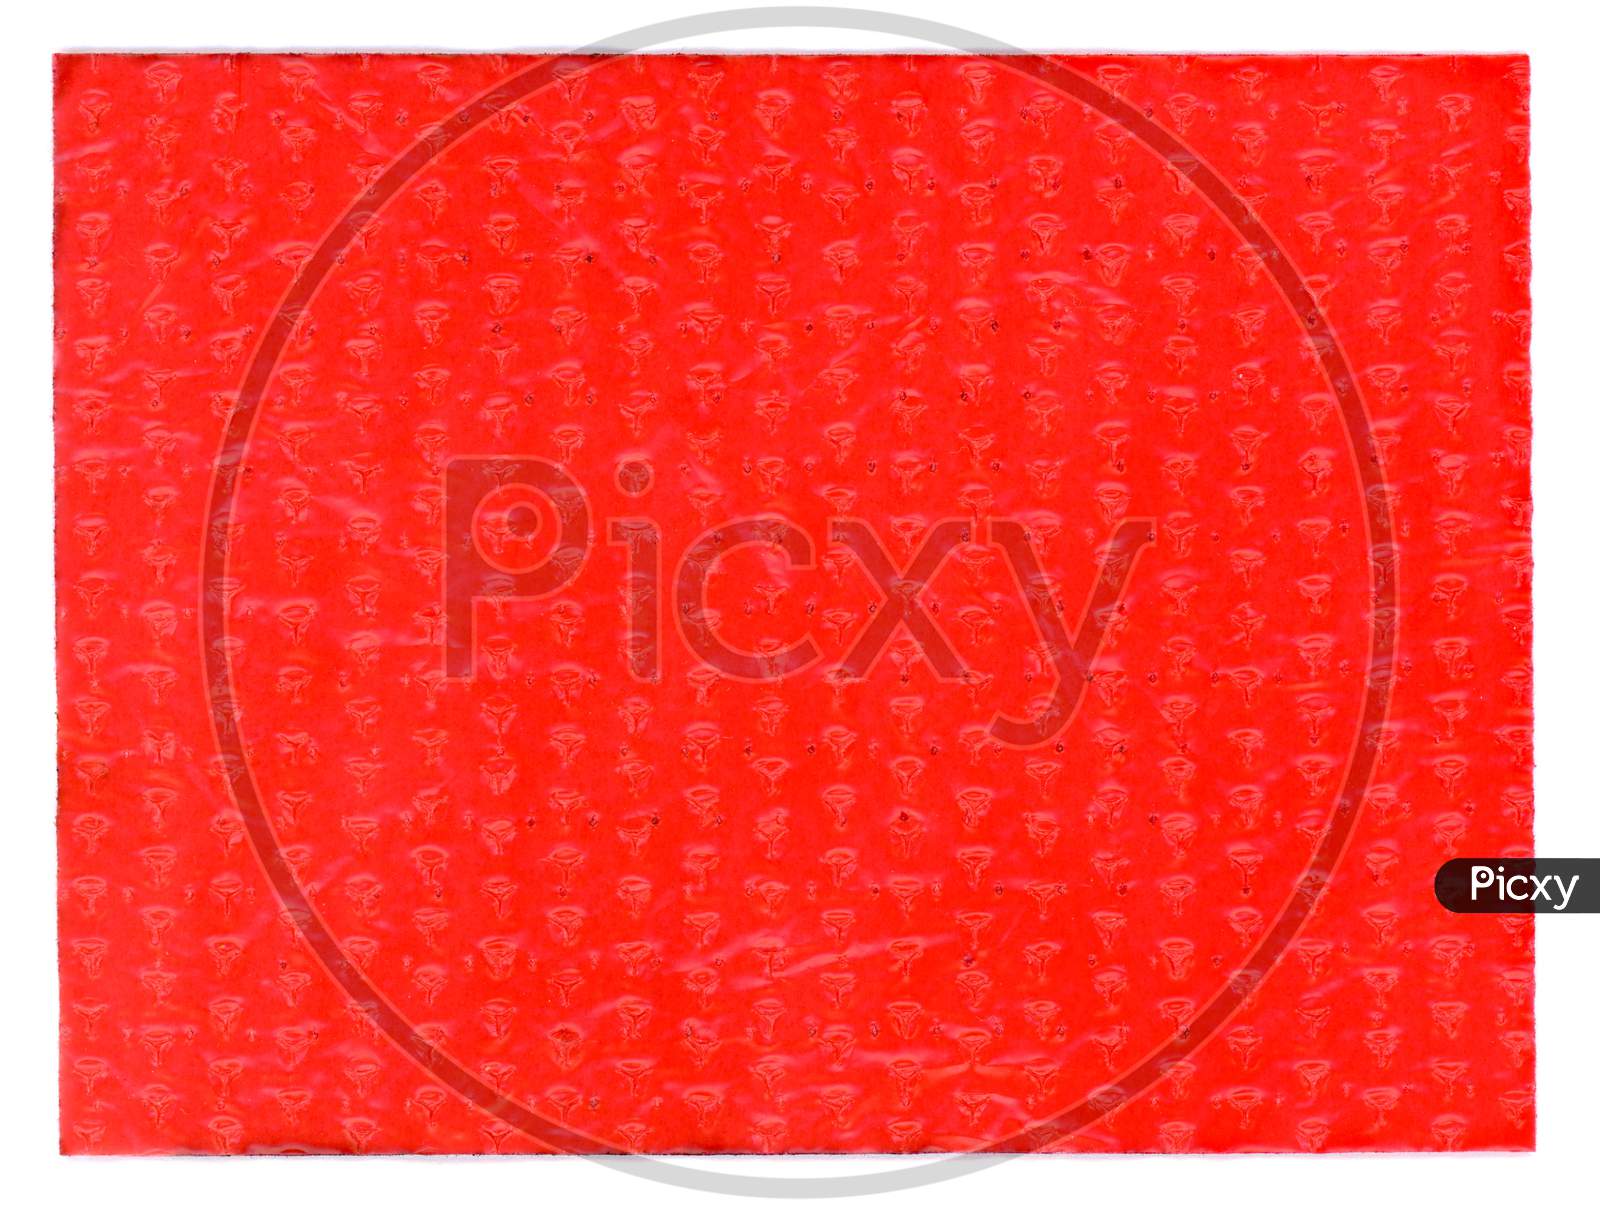 Red Plastic Texture Background